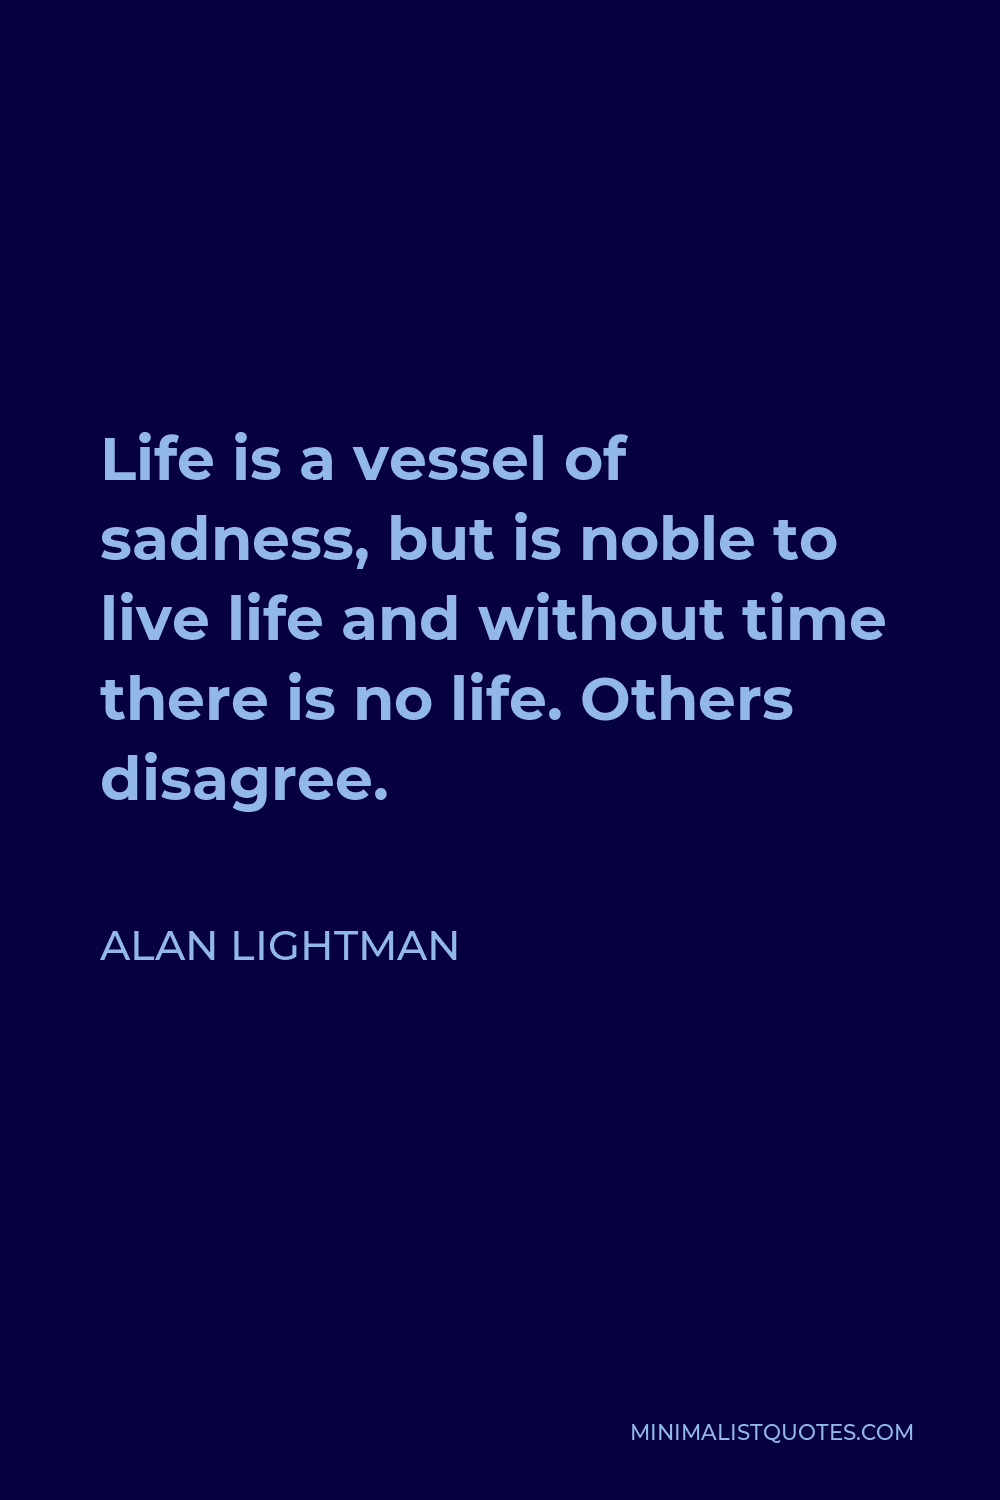 Alan Lightman Quote - Life is a vessel of sadness, but is noble to live life and without time there is no life. Others disagree.